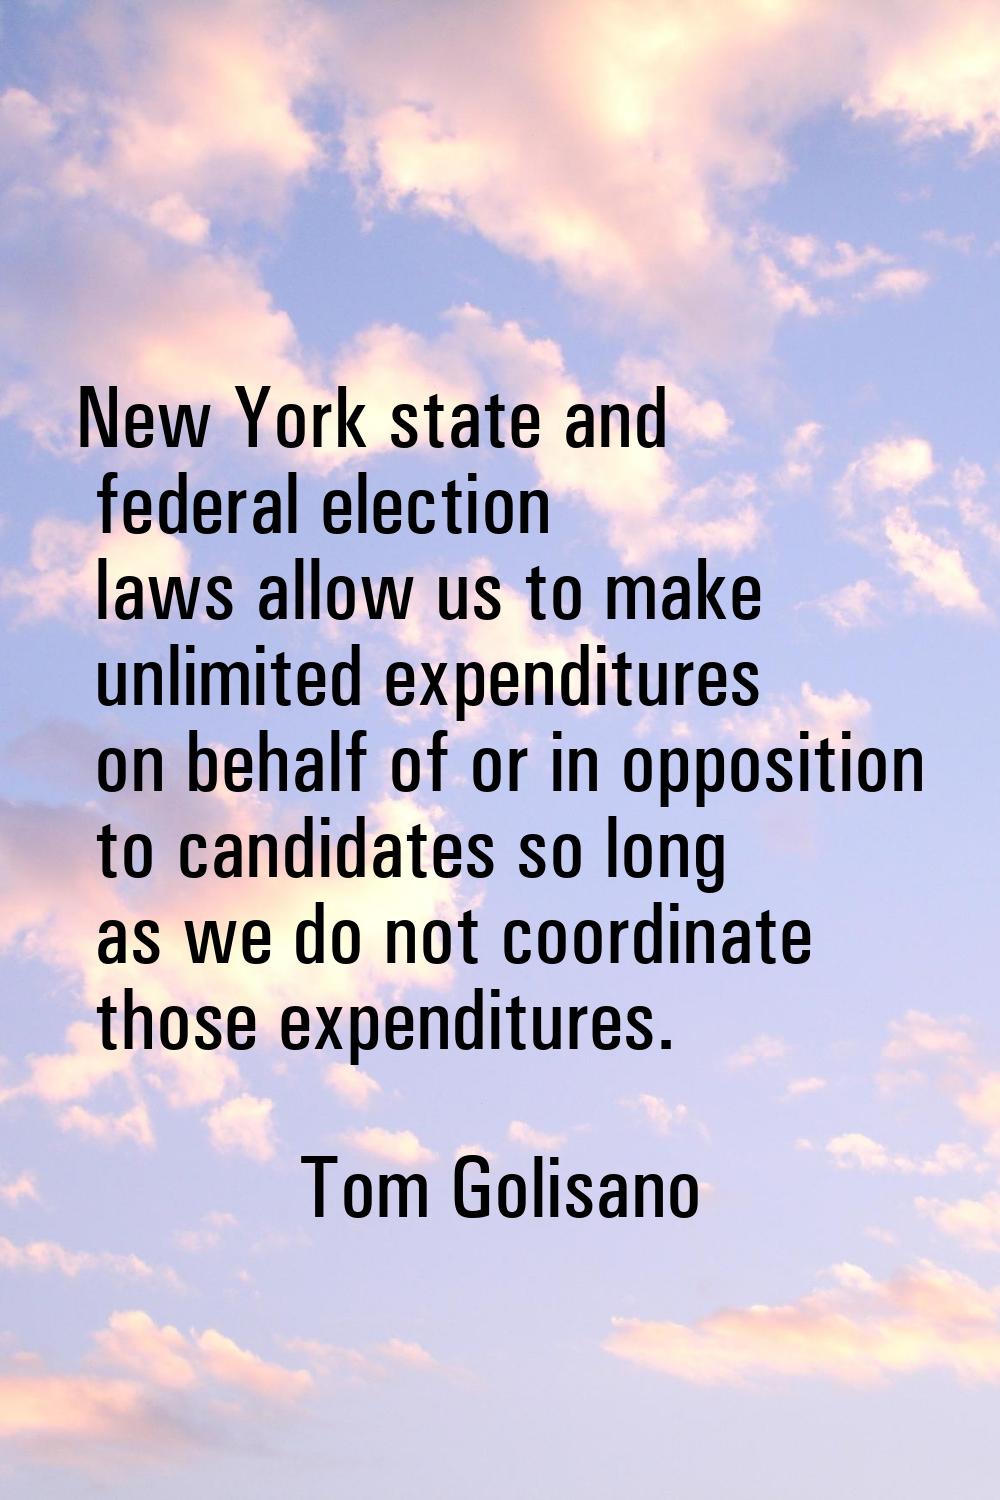 New York state and federal election laws allow us to make unlimited expenditures on behalf of or in